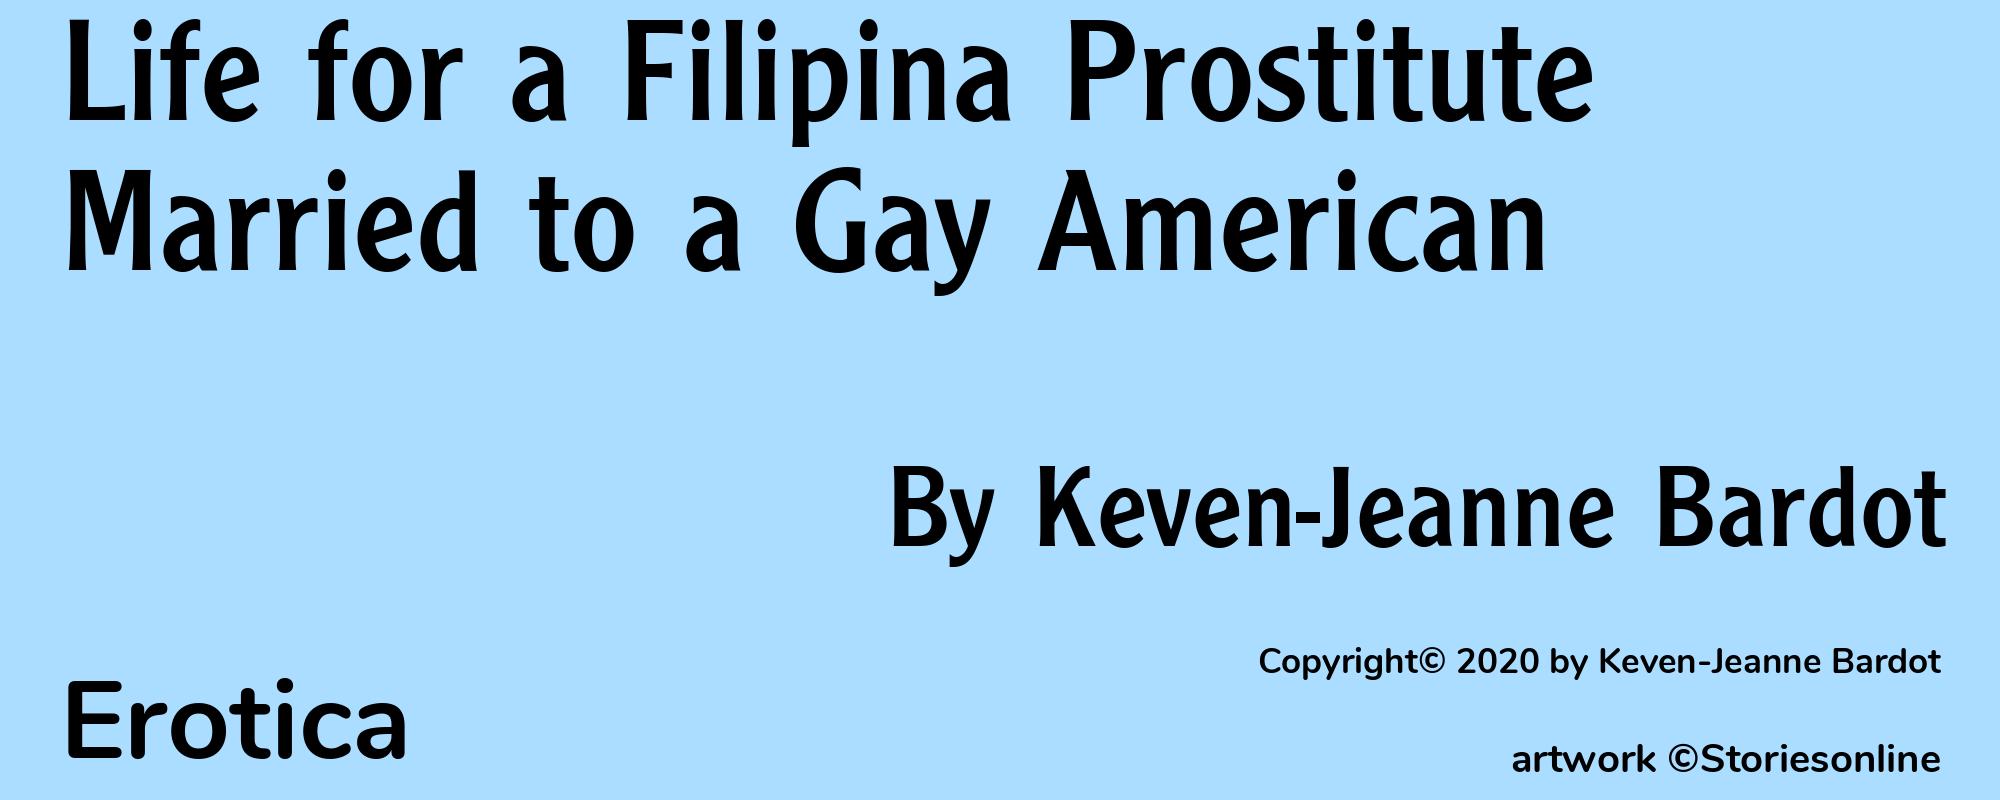 Life for a Filipina Prostitute Married to a Gay American - Cover